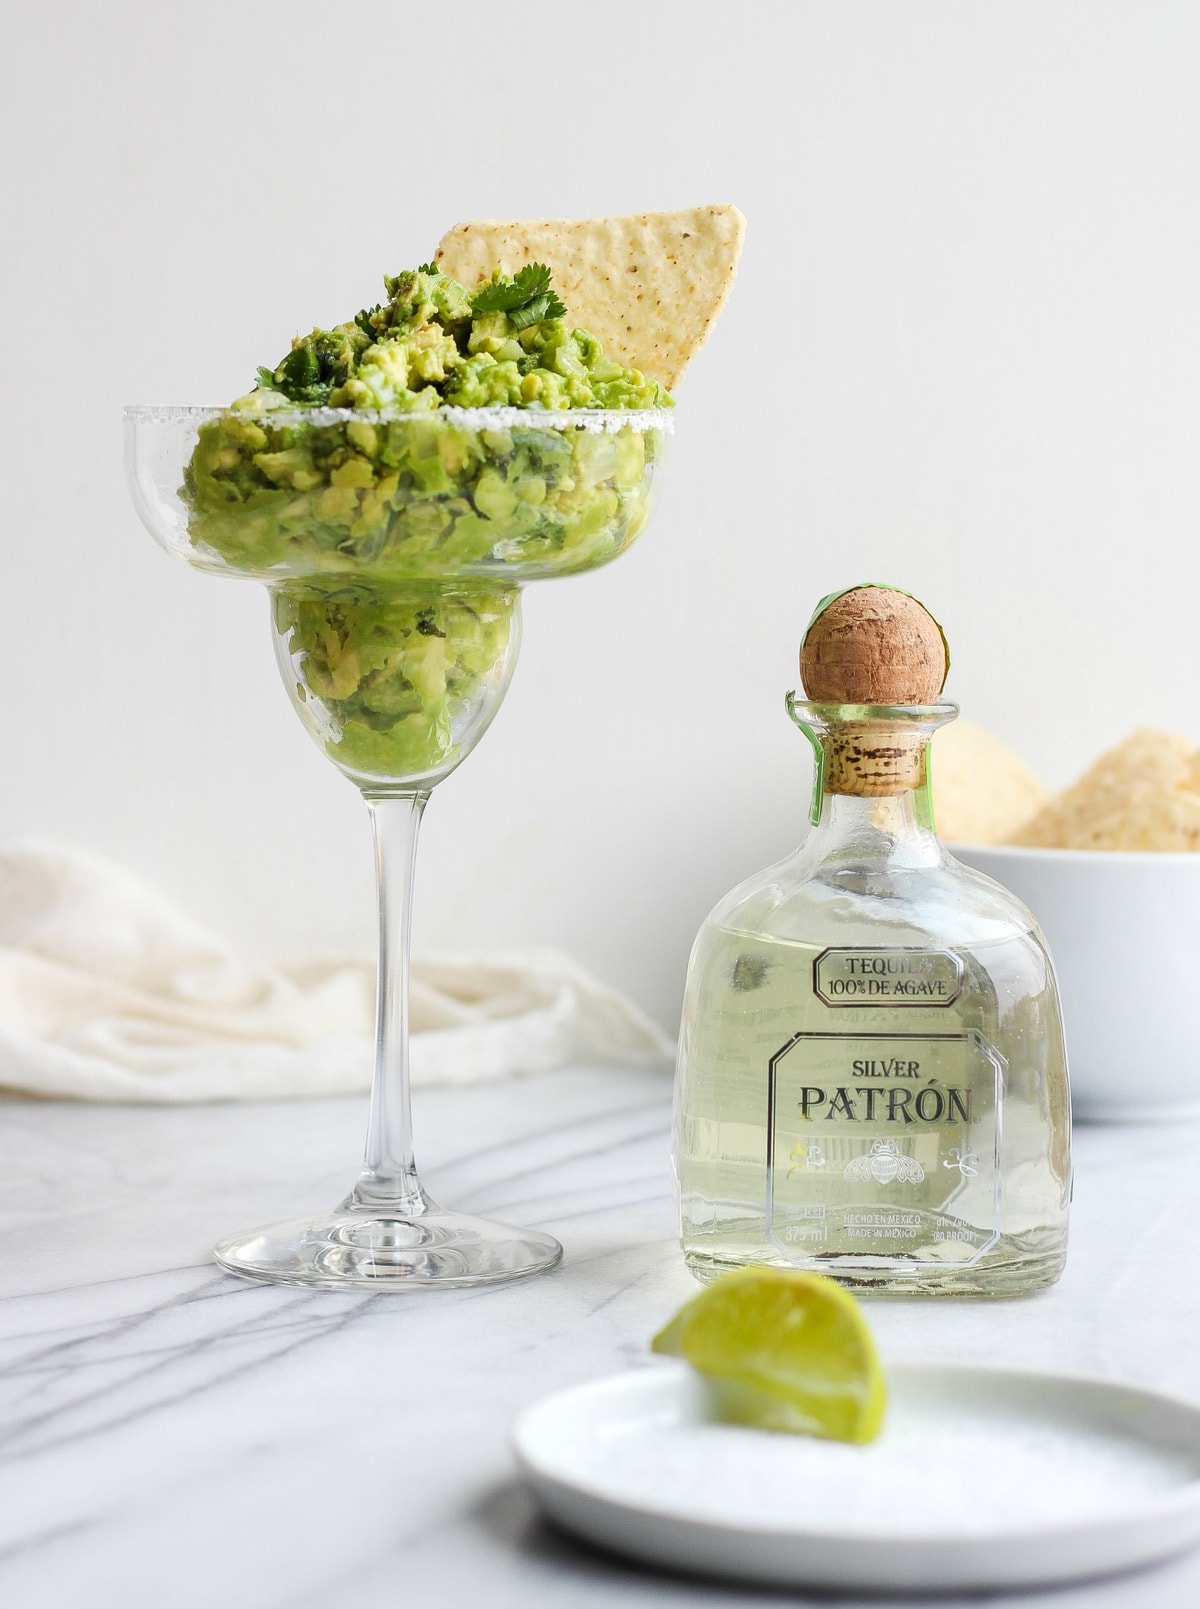 guacamole dip in a margarita glass, next to a bottle of tequila